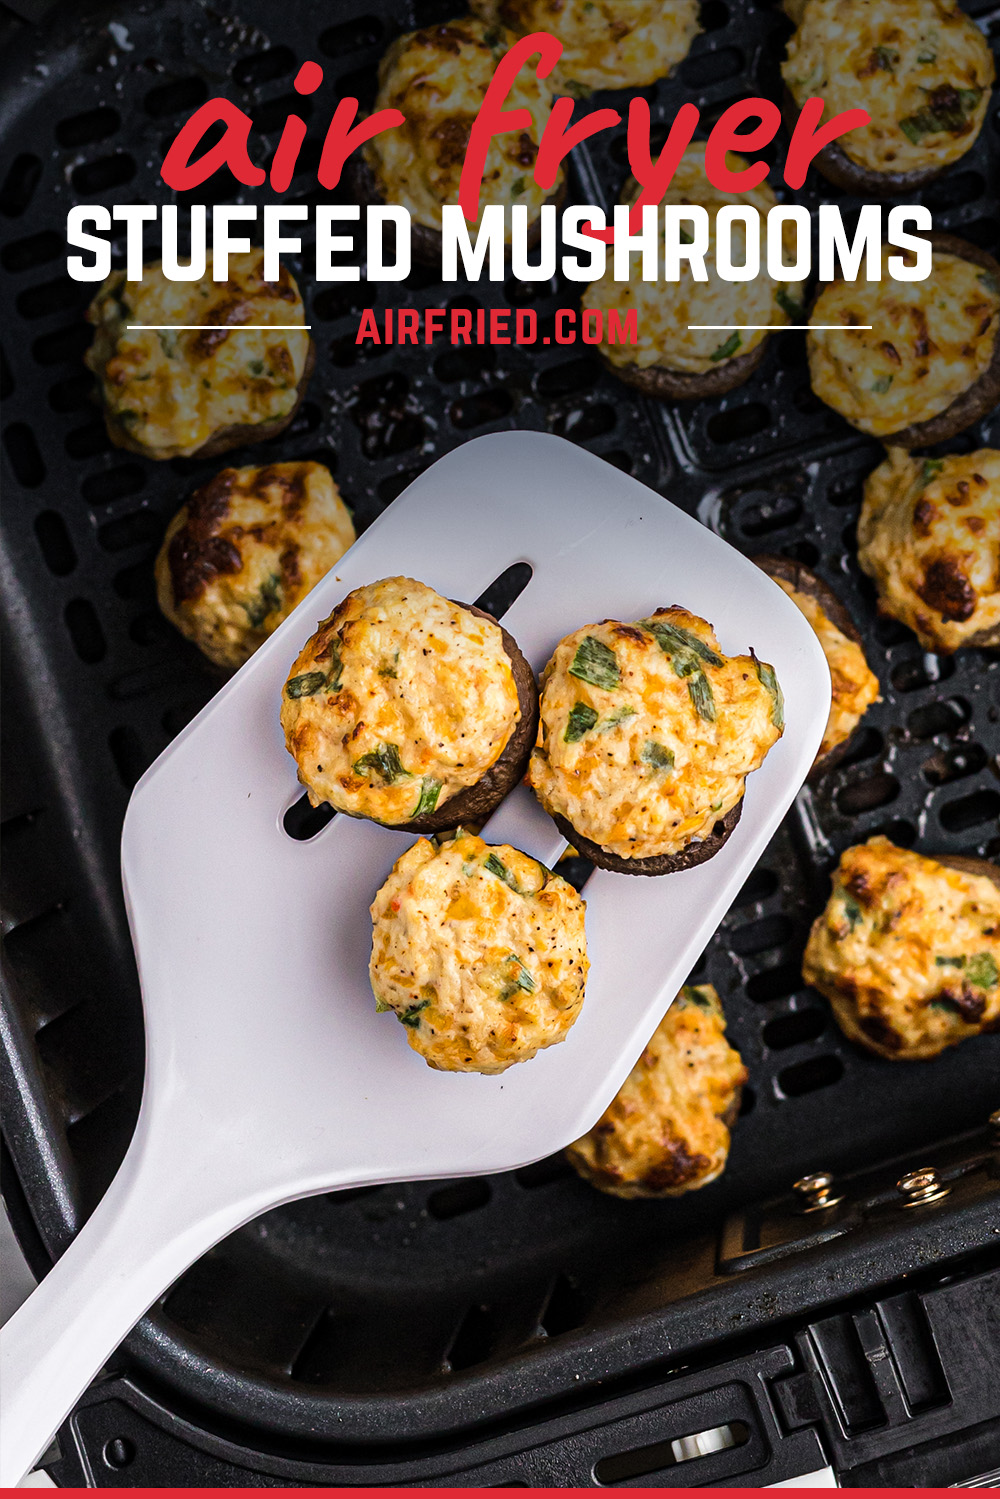 These mushrooms are so good! They are stuffed with crab, shrimp, and cheese! #seafood #mushrooms #airfried